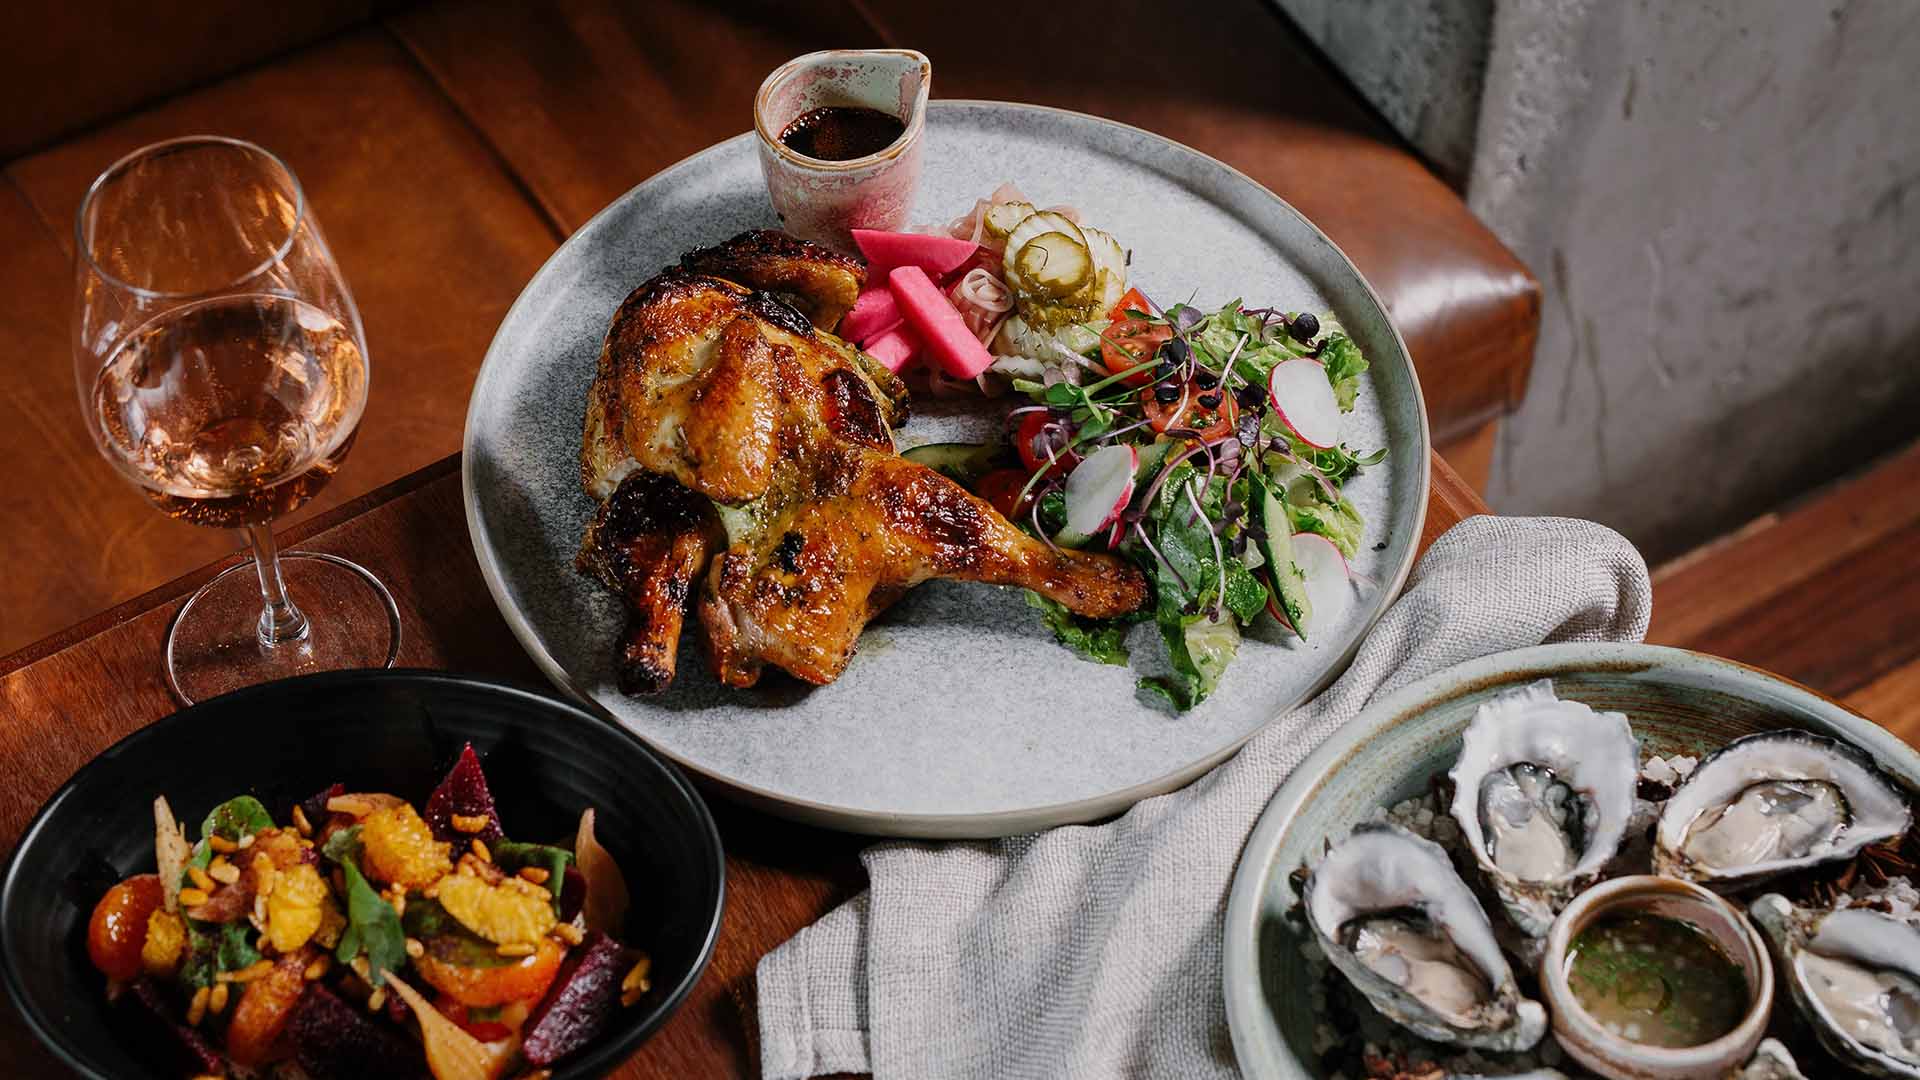 Embers Is the New Grill and Rotisserie Restaurant Opening Inside South Bank's The Charming Squire